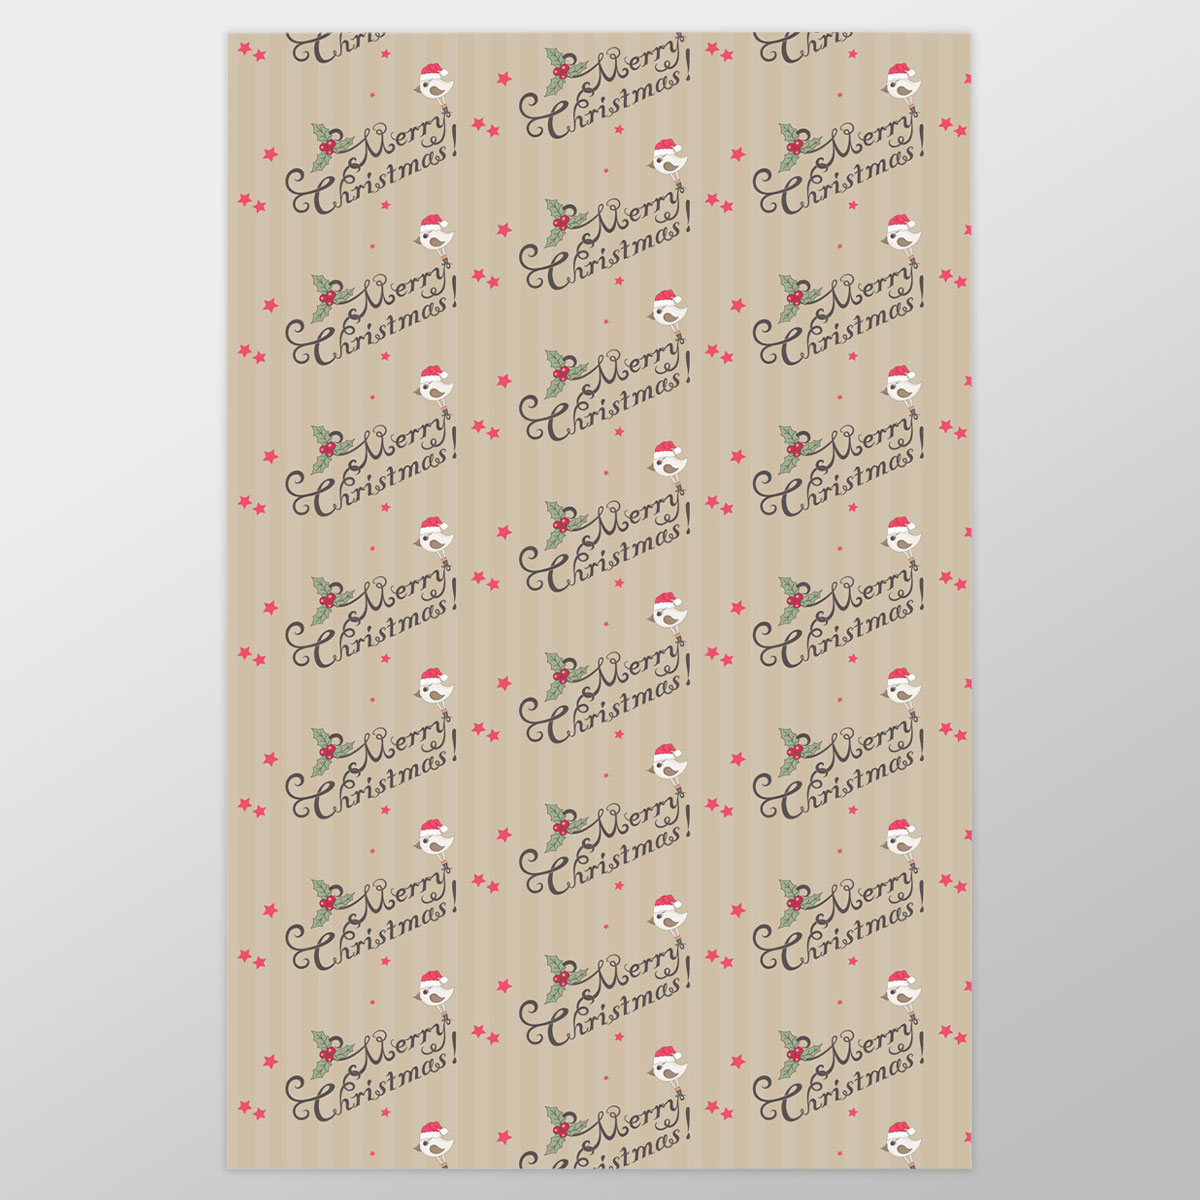 Merry Christmas With Cardinal Bird And Holly Leaf Wrapping Paper